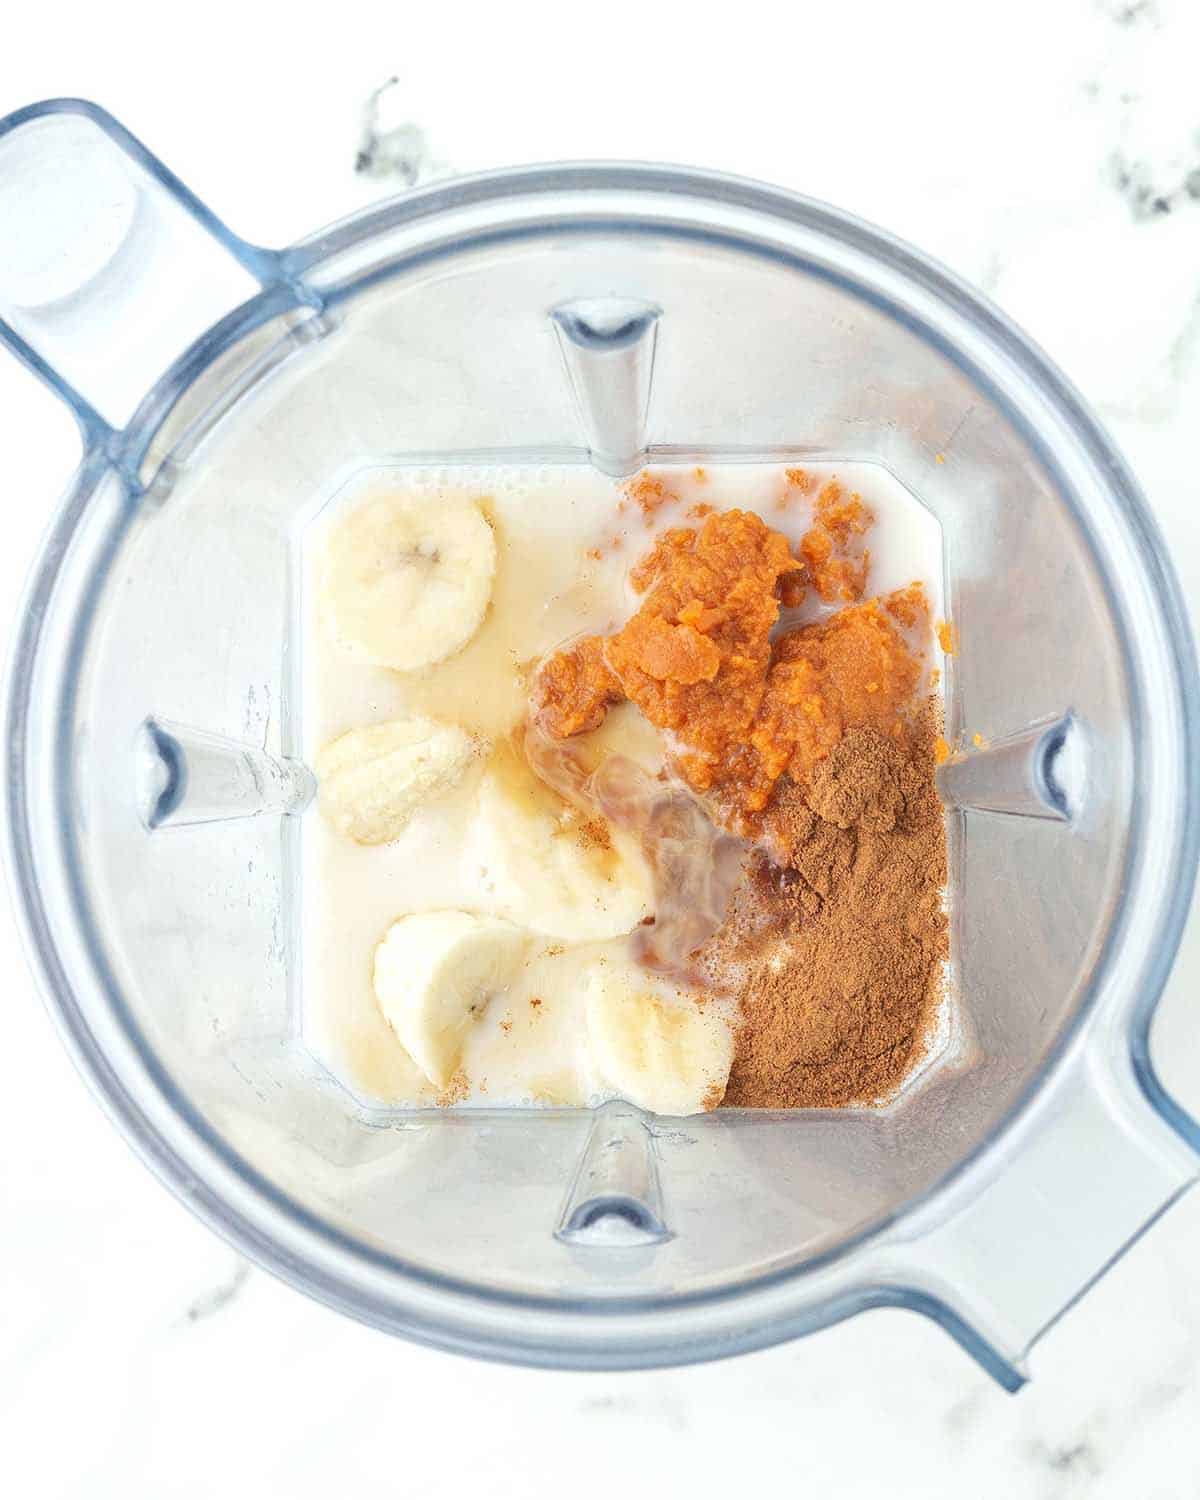 An overhead image showing the ingredients for a pumpkin pie smoothie in a blender canister just before being blended.